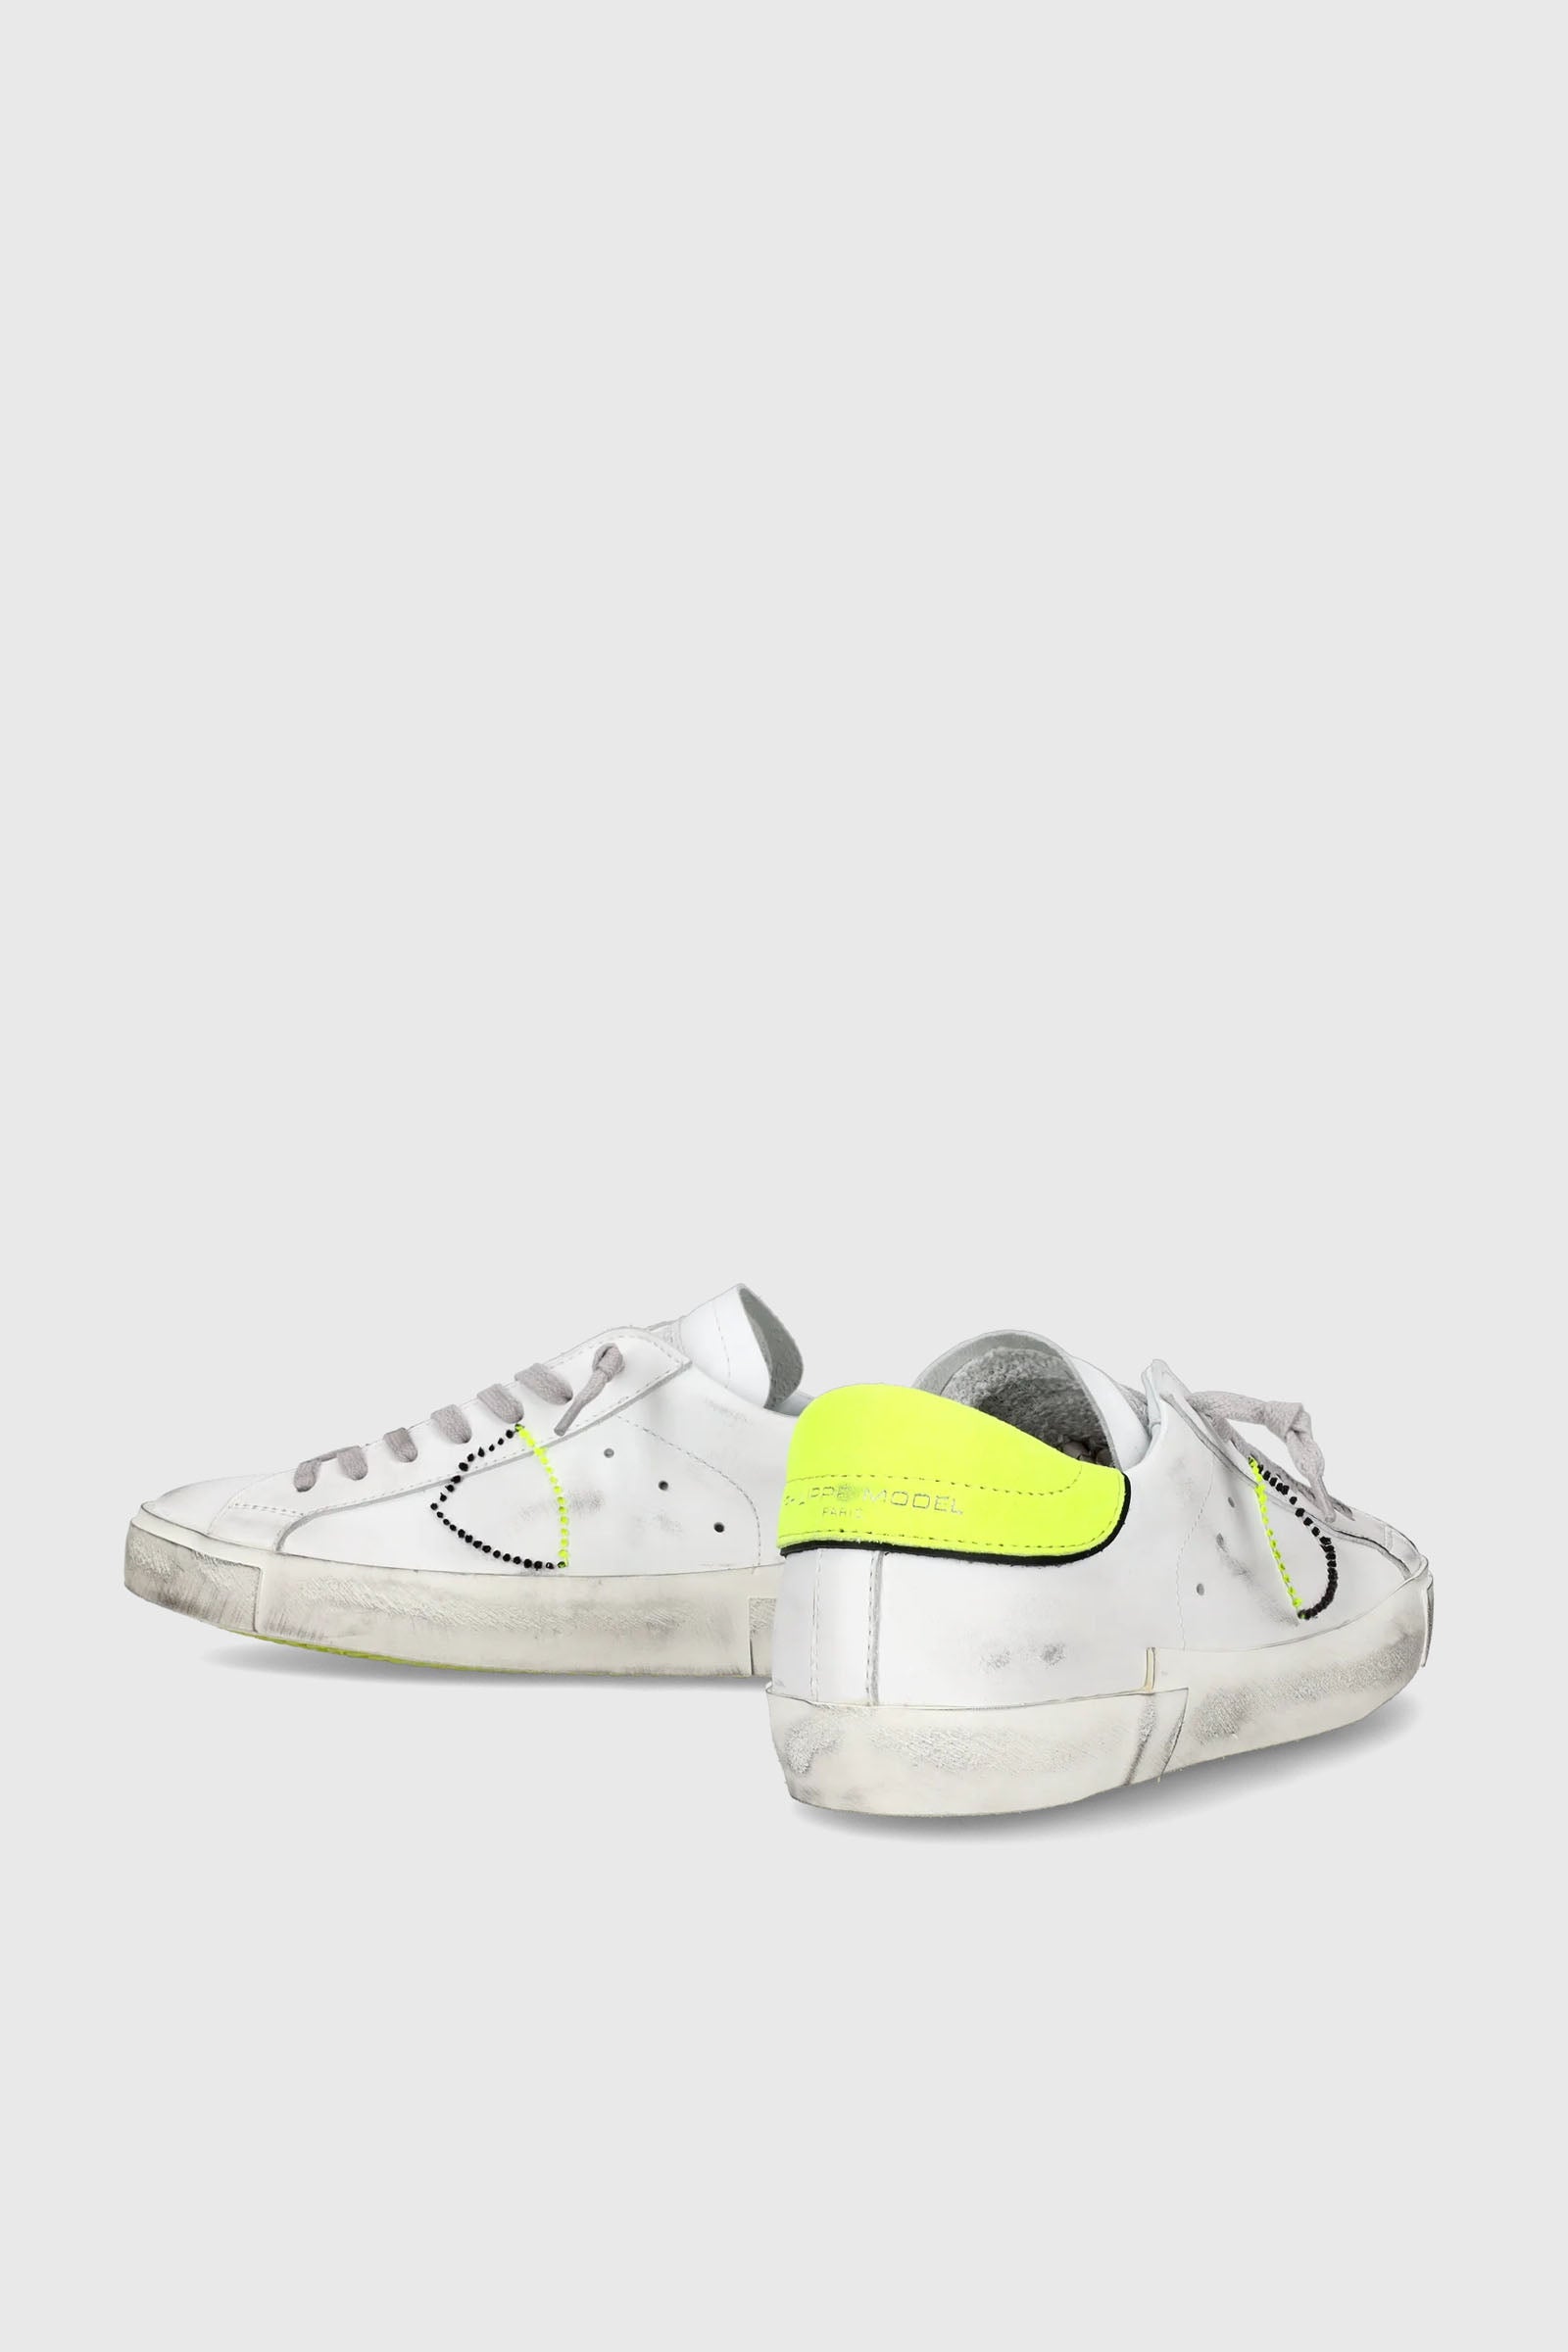 Philippe Model Sneakers PRSX Veau Broderie Leather White/Yellow Fluo - 4